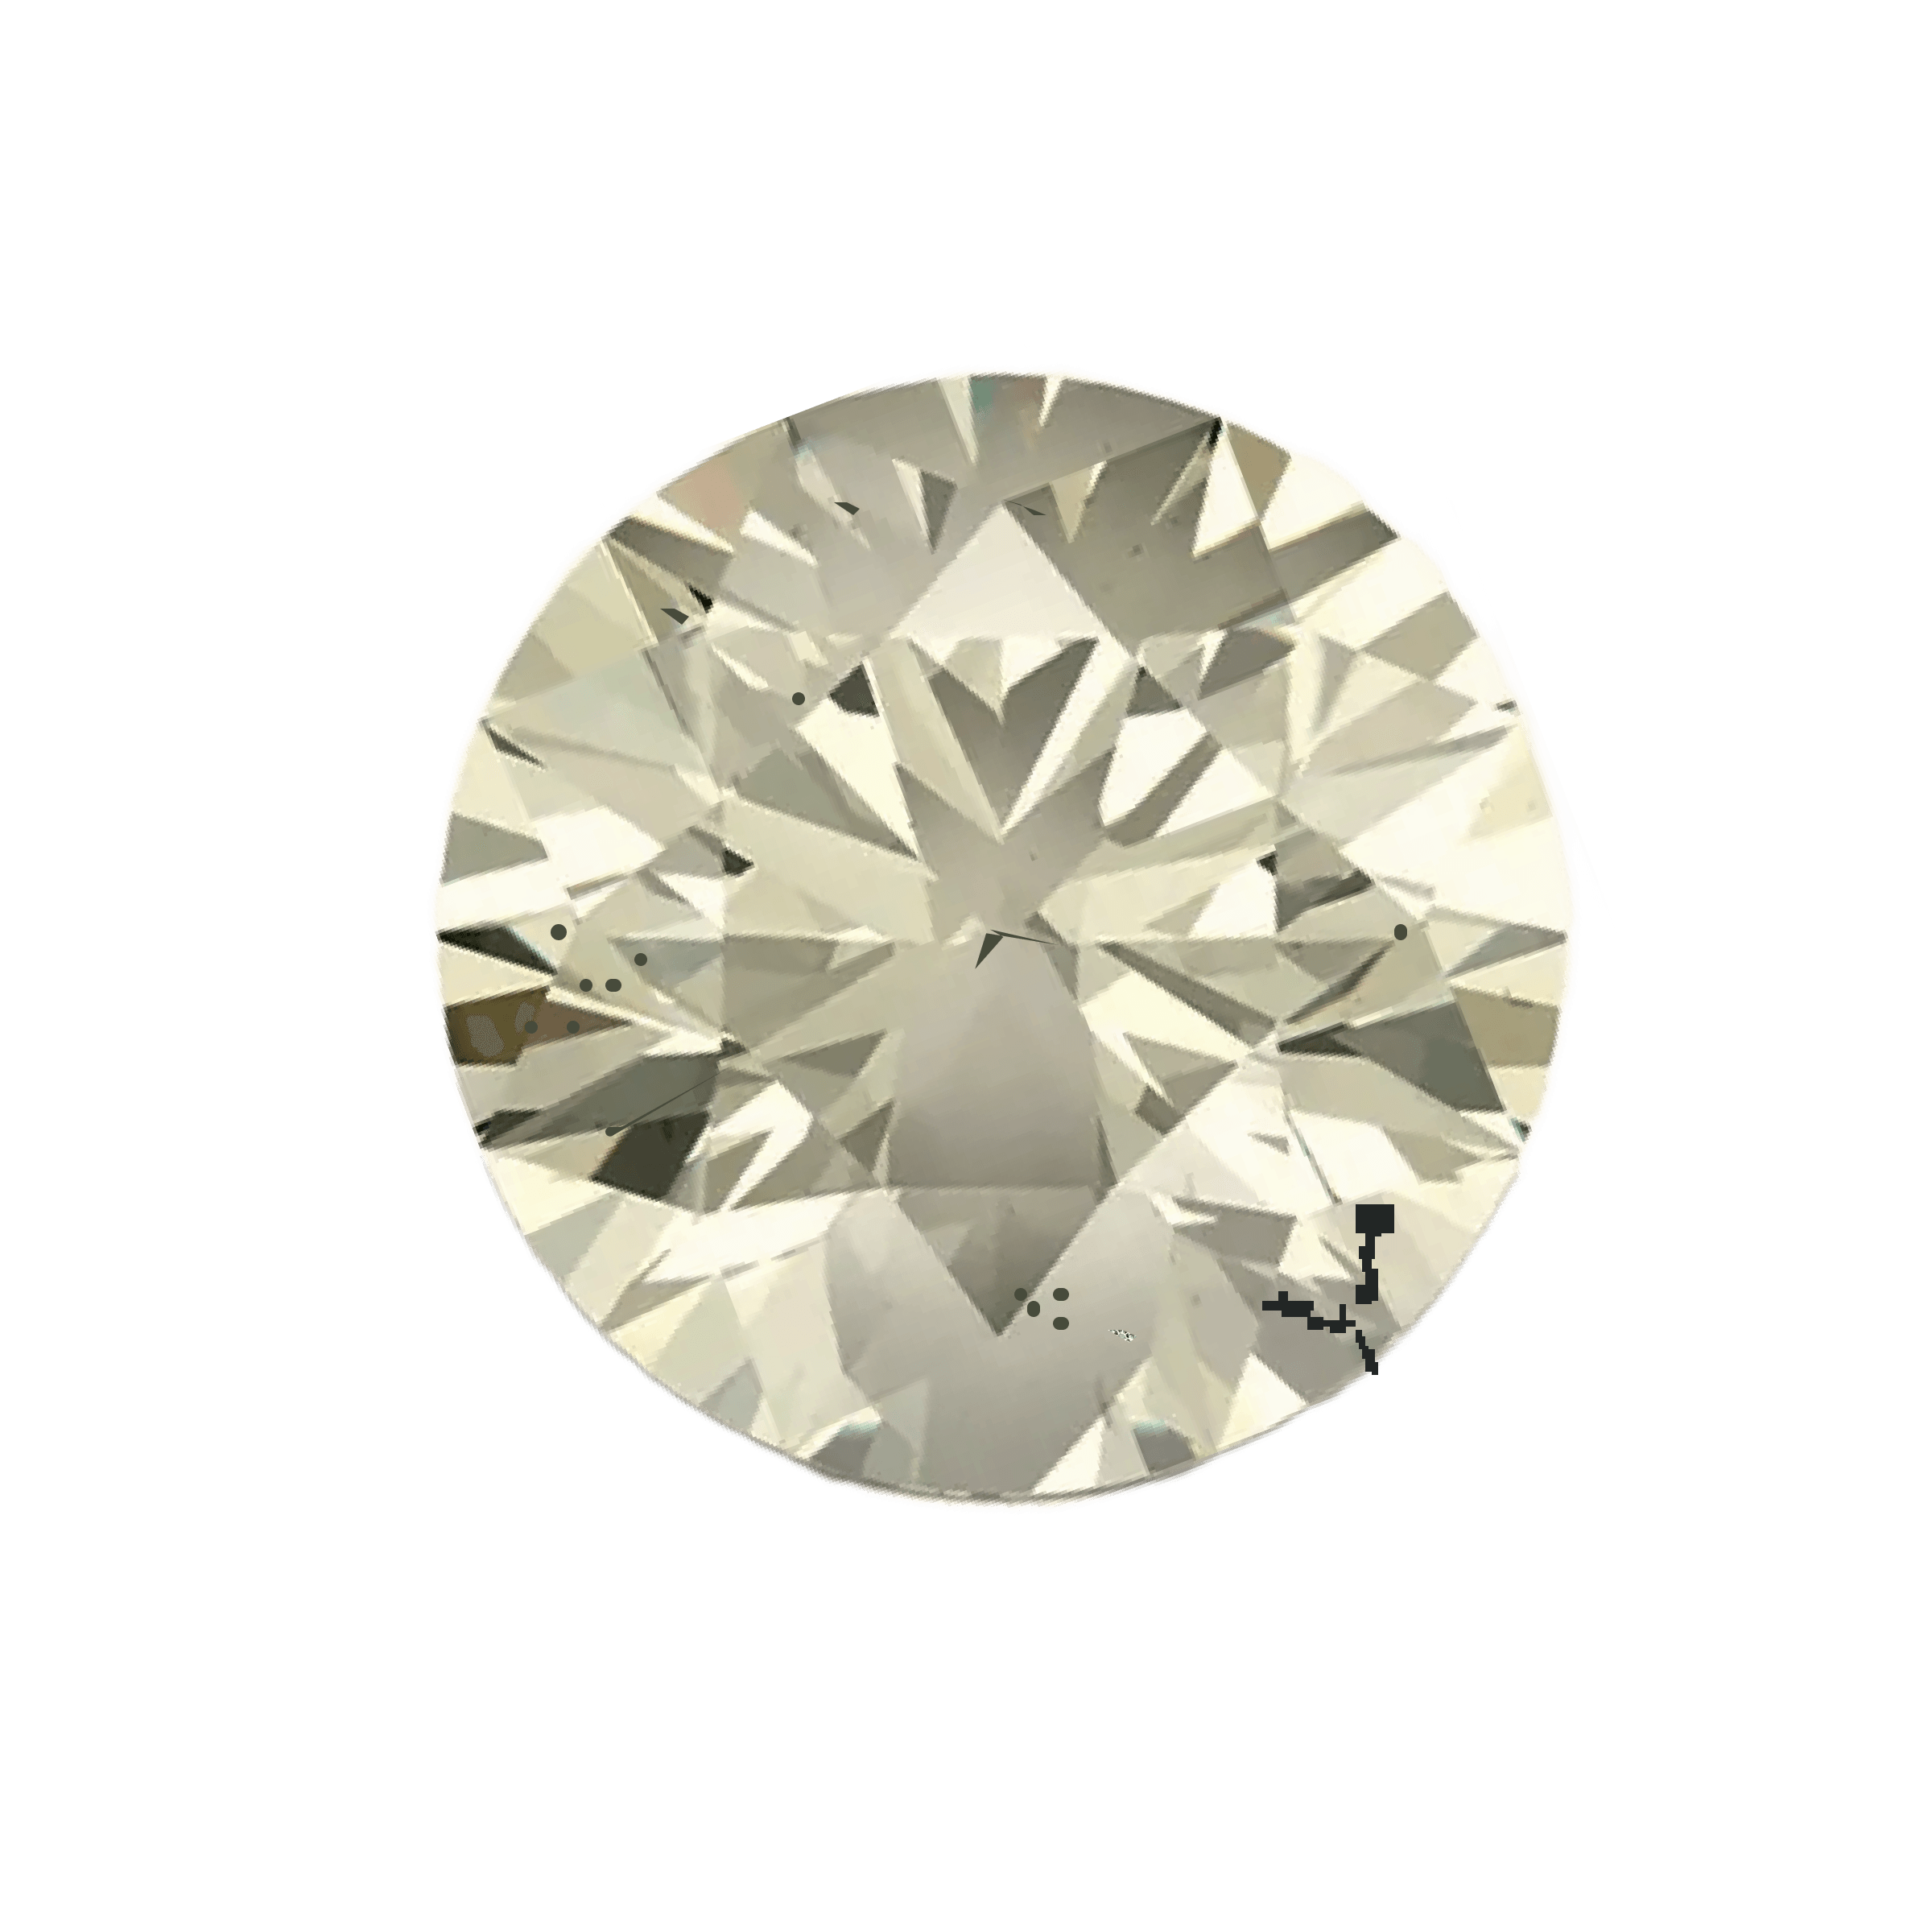 A poor quality mined diamond